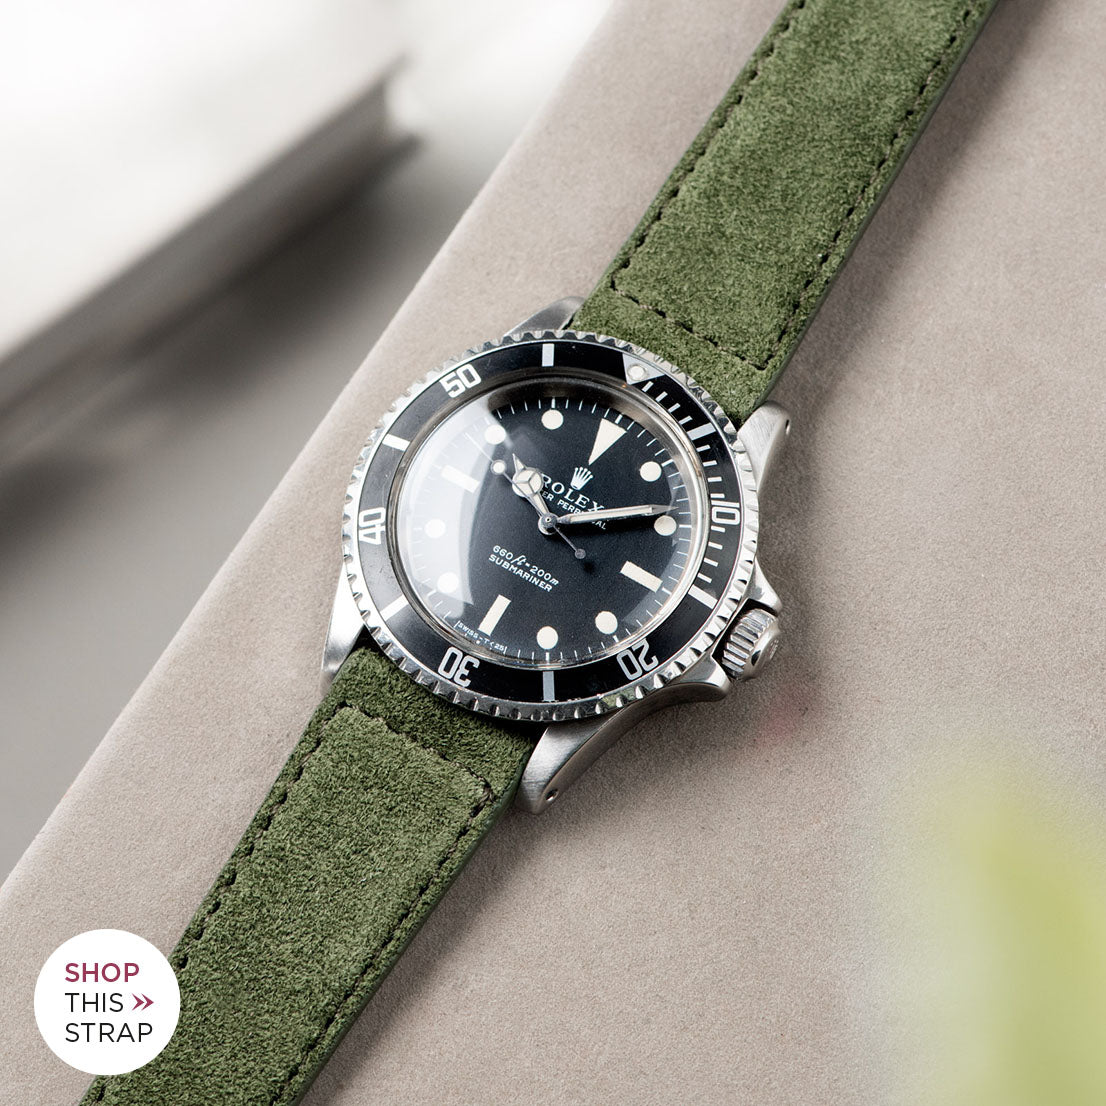 Bulang and Sons_Strap Guide_The Rolex 5513 Black Submariner_Olive Drab Green Suede Leather Watch Strap